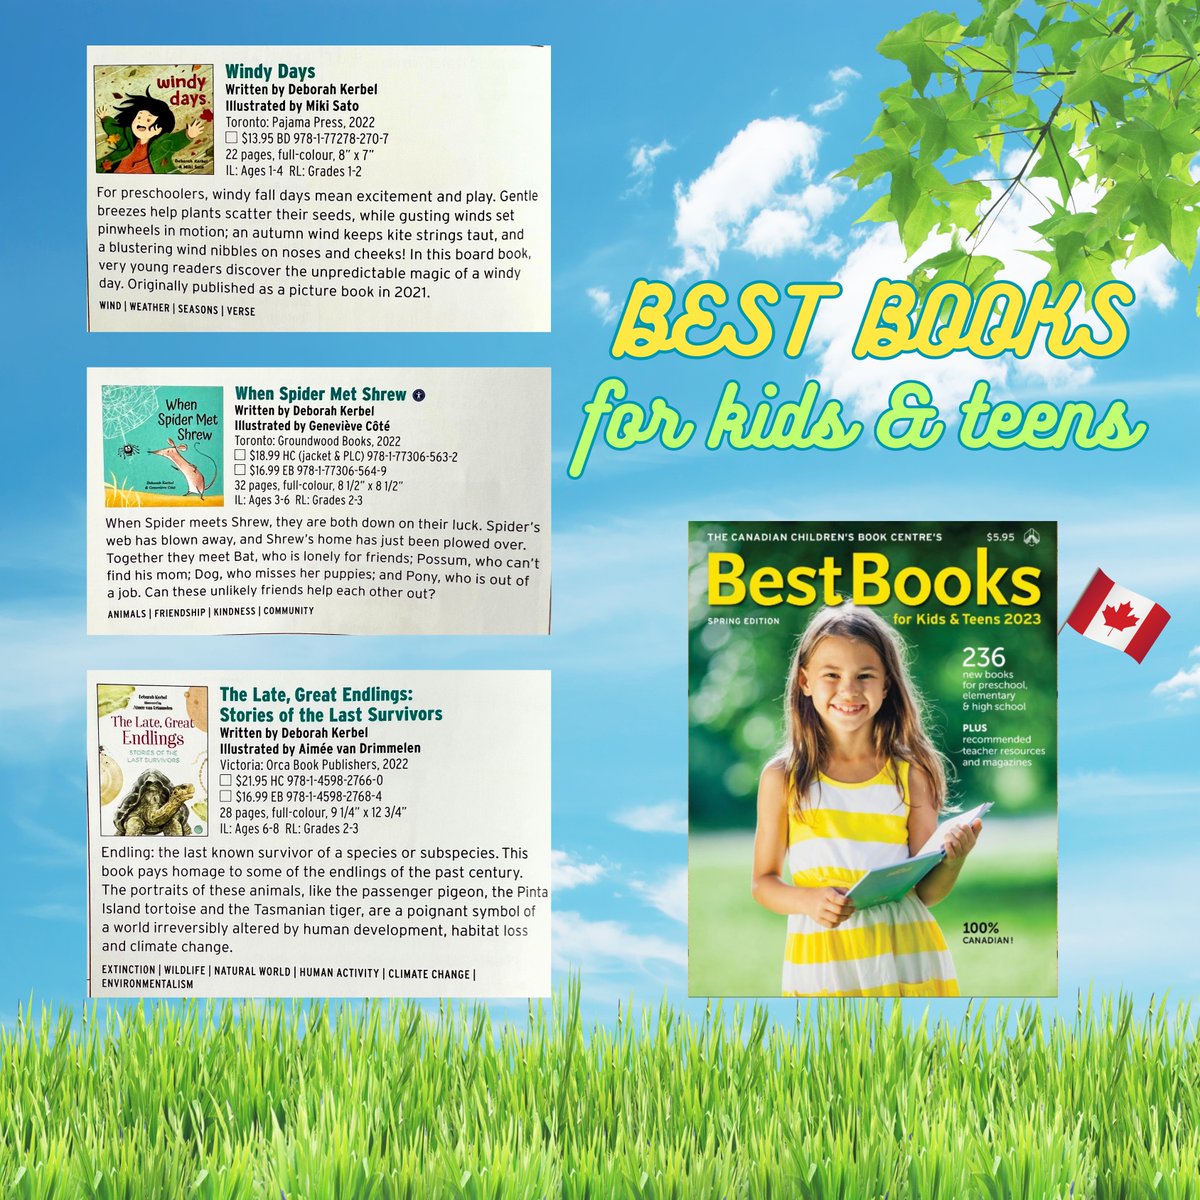 🎉Huzzah! 🎉 Absolutely delighted to find THREE of my books in @kidsbookcentre’s 'Best Books for Kids and Teens Spring 2023' issue (board book, picture book, and science categories). @PajamaPress1 @GroundwoodBooks @orcabook @ireadcanadian @picturebookseh